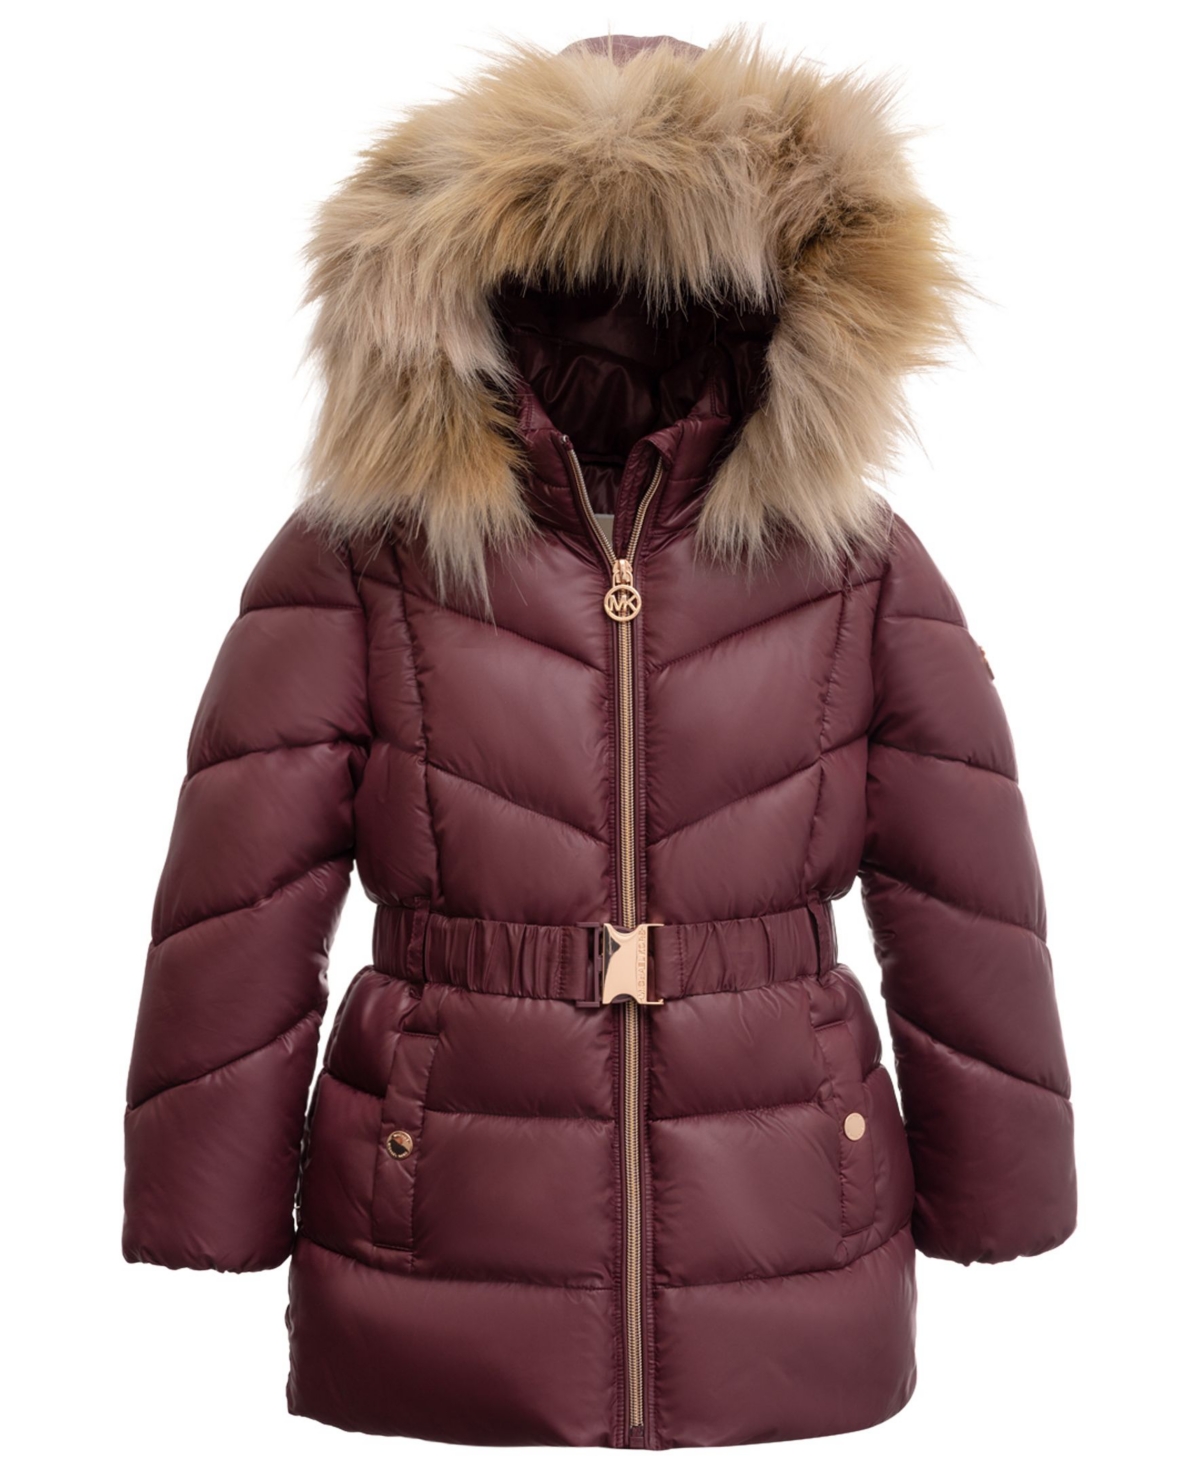 MICHAEL KORS TODDLER AND LITTLE GIRLS HEAVY WEIGHT BELTED JACKET